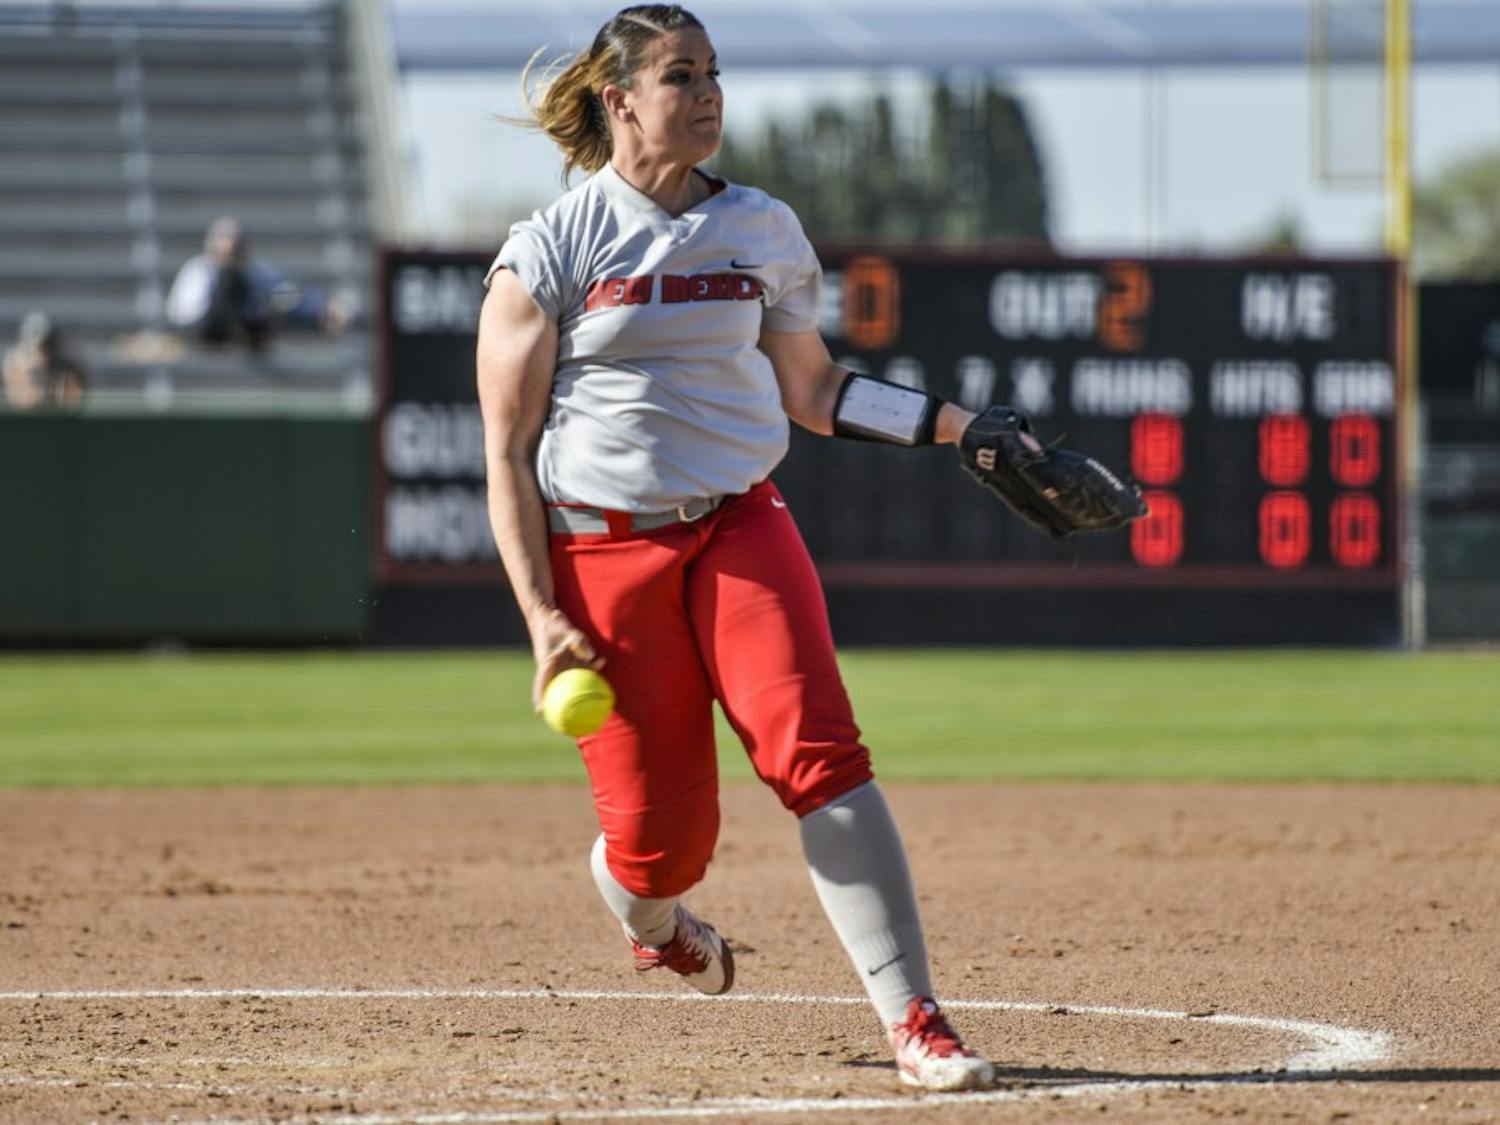 Senior pitcher Lisa Rodrigues pitches against a San Diego State batter Friday afternoon at the Lobo Softball Field. The Lobos lost to the Aztecs 23-4.&nbsp;